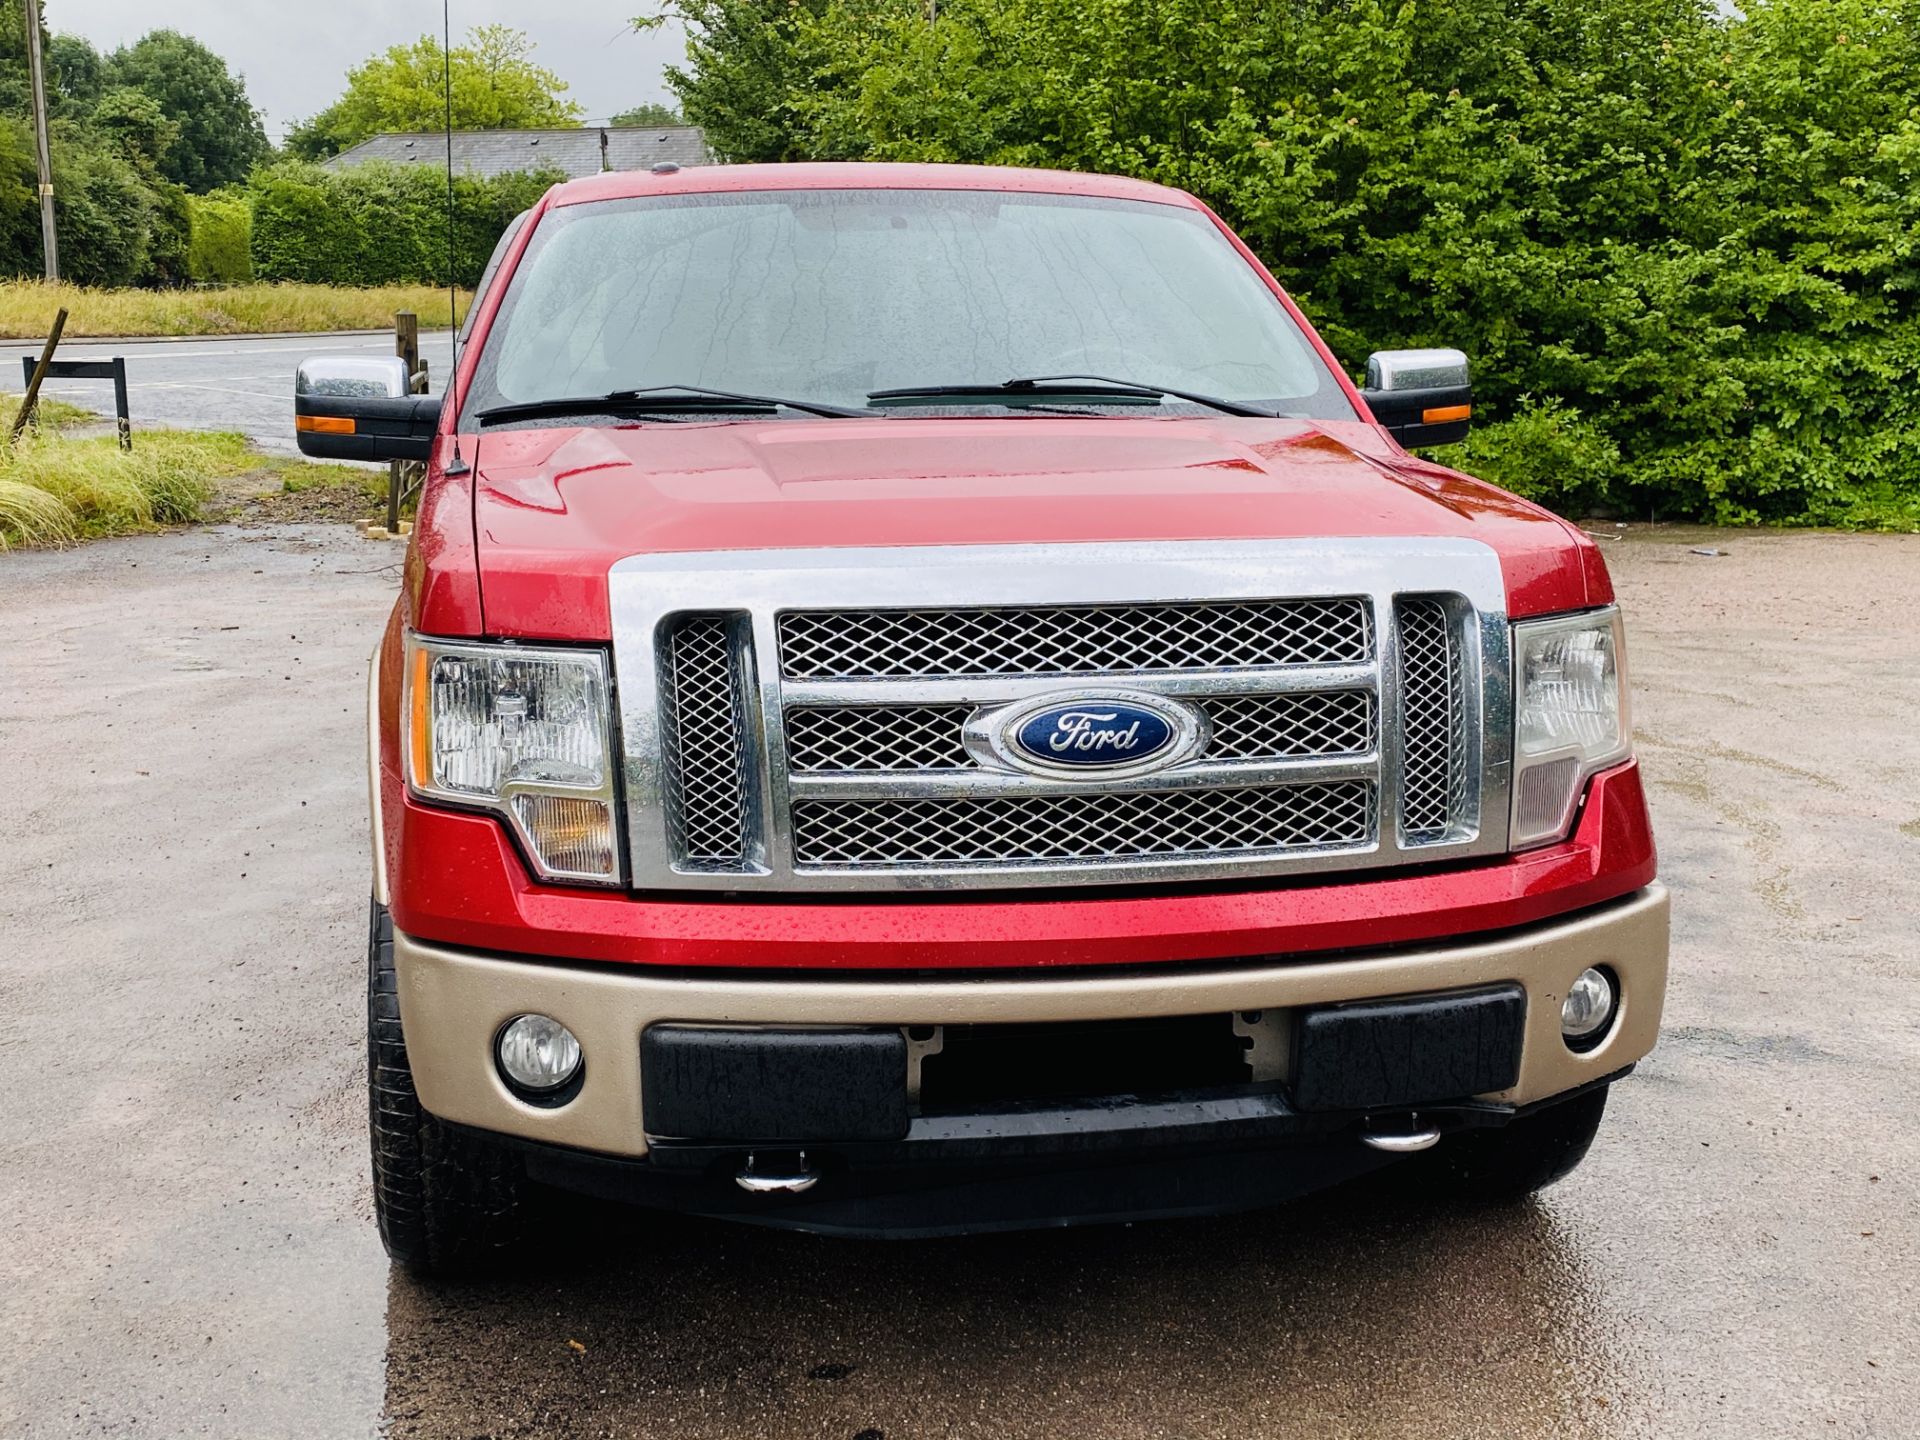 (RESERVE MET)Ford F-150 3.5L V6 Eco-Boost Super-Crew Cab Lariat Model '2012 Year' 4x4 - Fully Loaded - Image 4 of 78